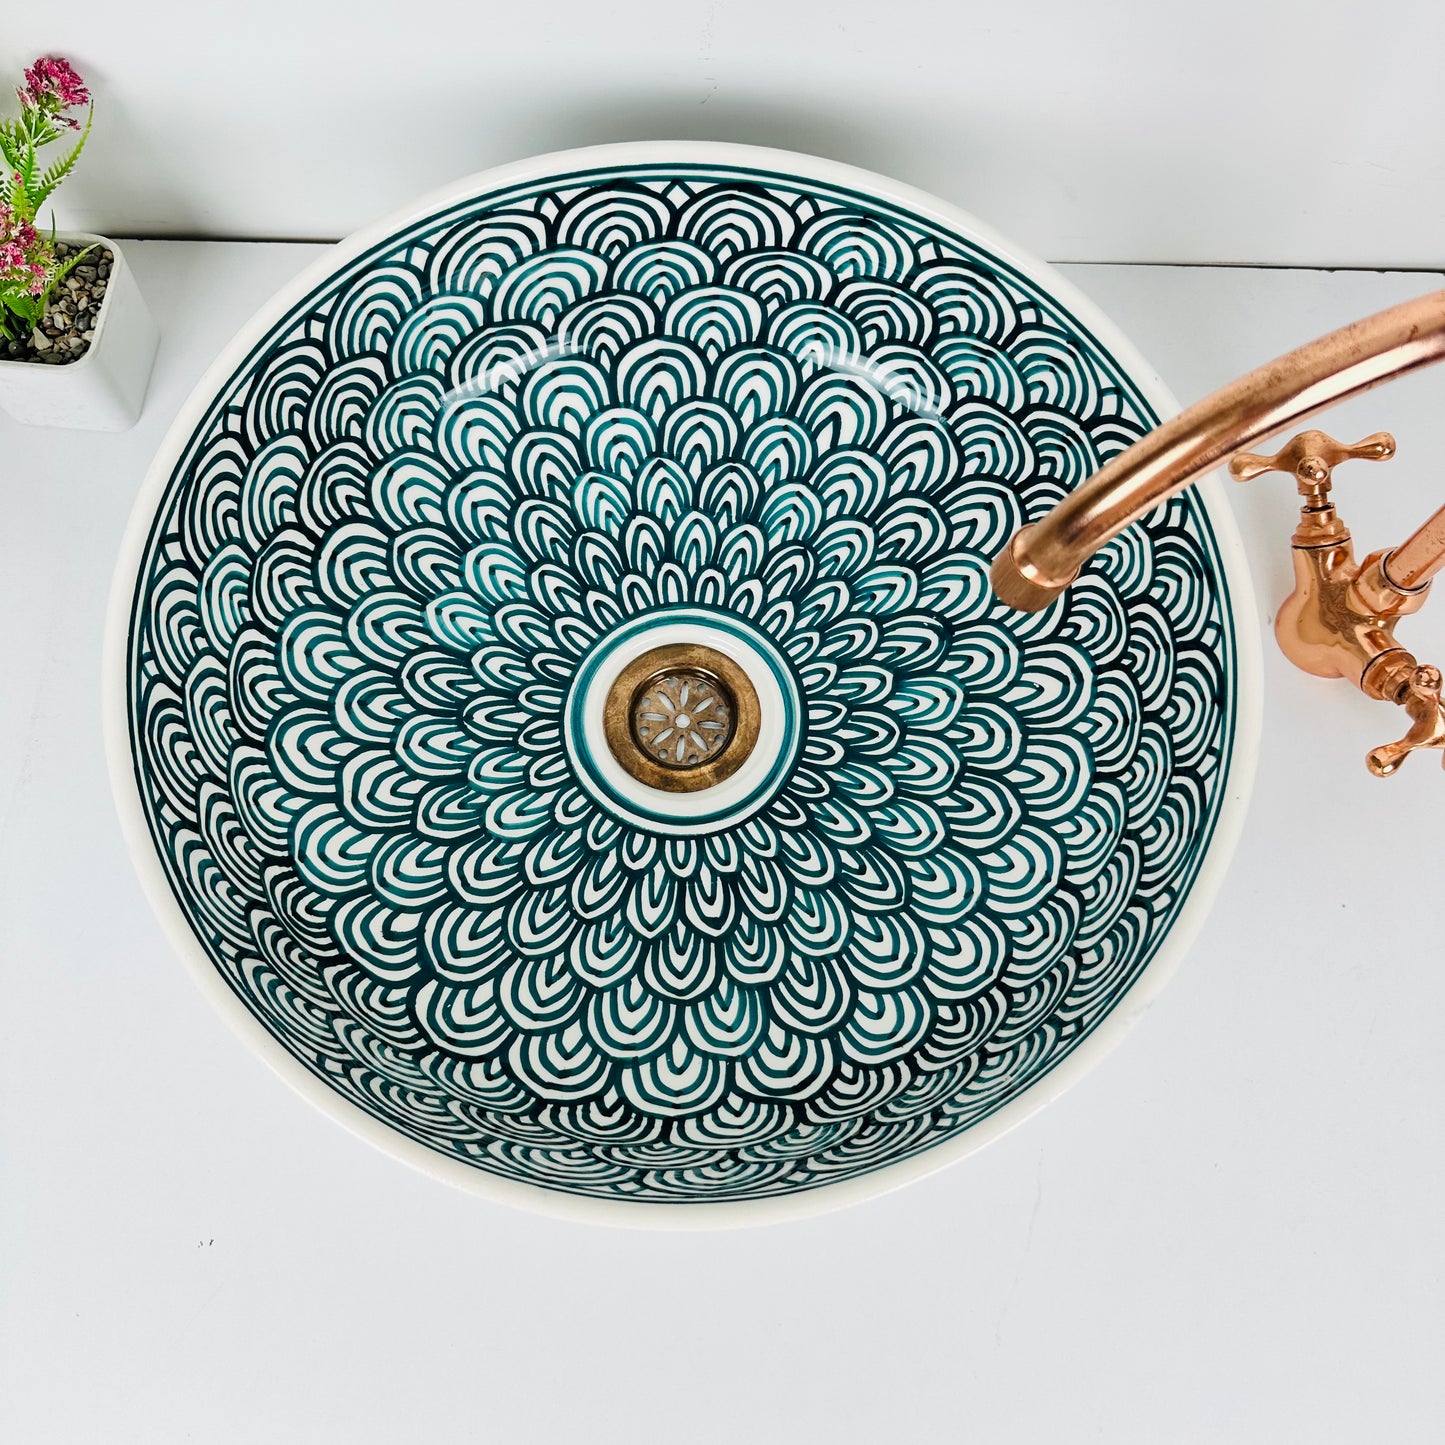 Oceanic Tranquility: Handcrafted Ceramic Sink 100% handmade